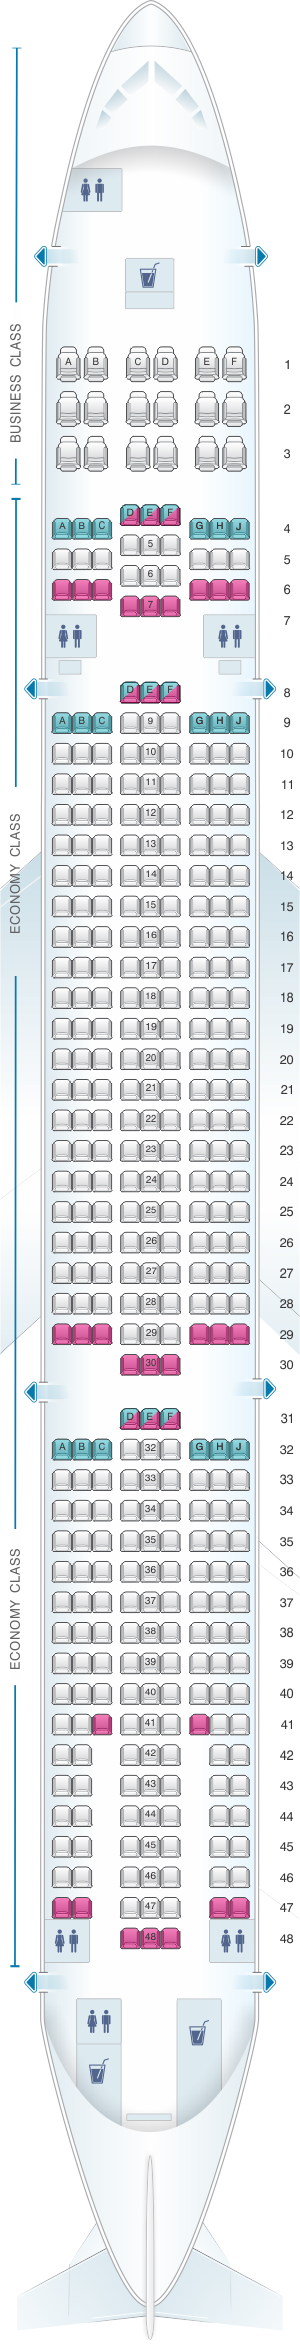 Seat map for Hi Fly Airbus A330 900